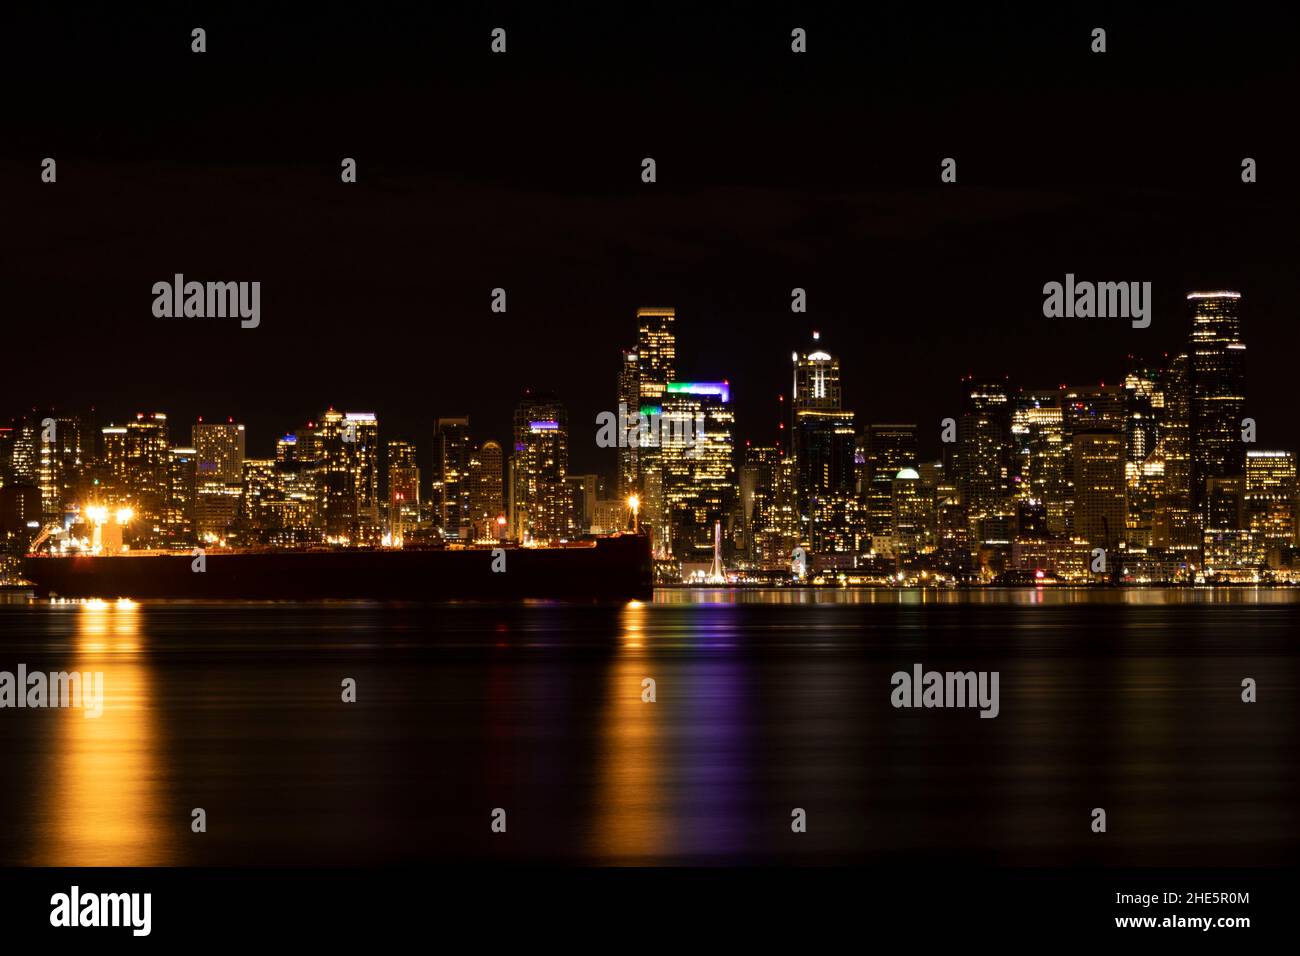 Seattle City Skyline With Container Ship in foreground Stock Photo